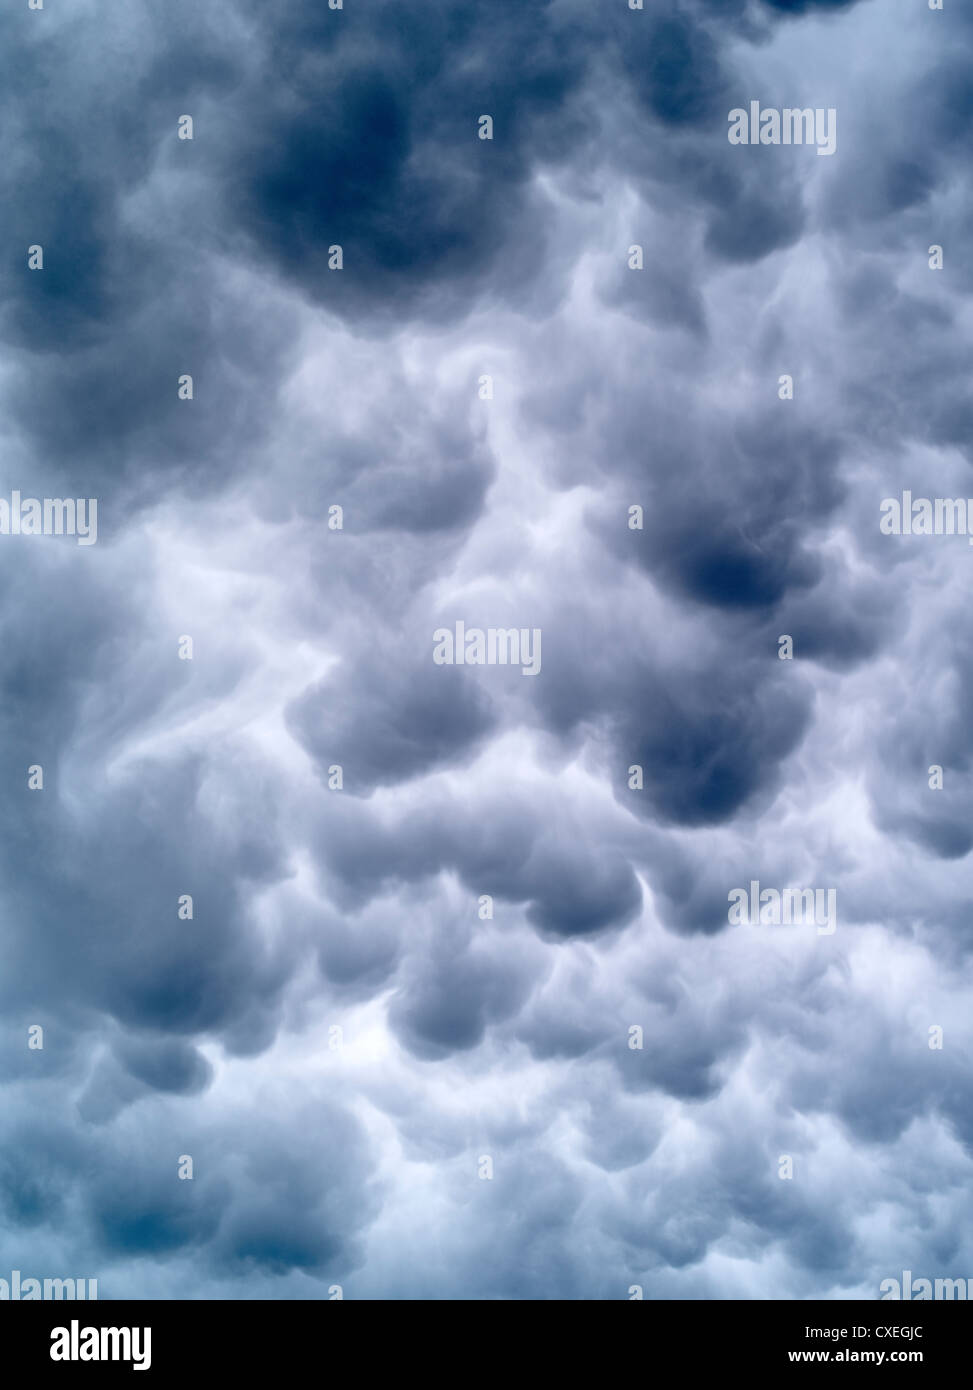 Bowling ball clouds from an approaching thunderstorm. Stock Photo